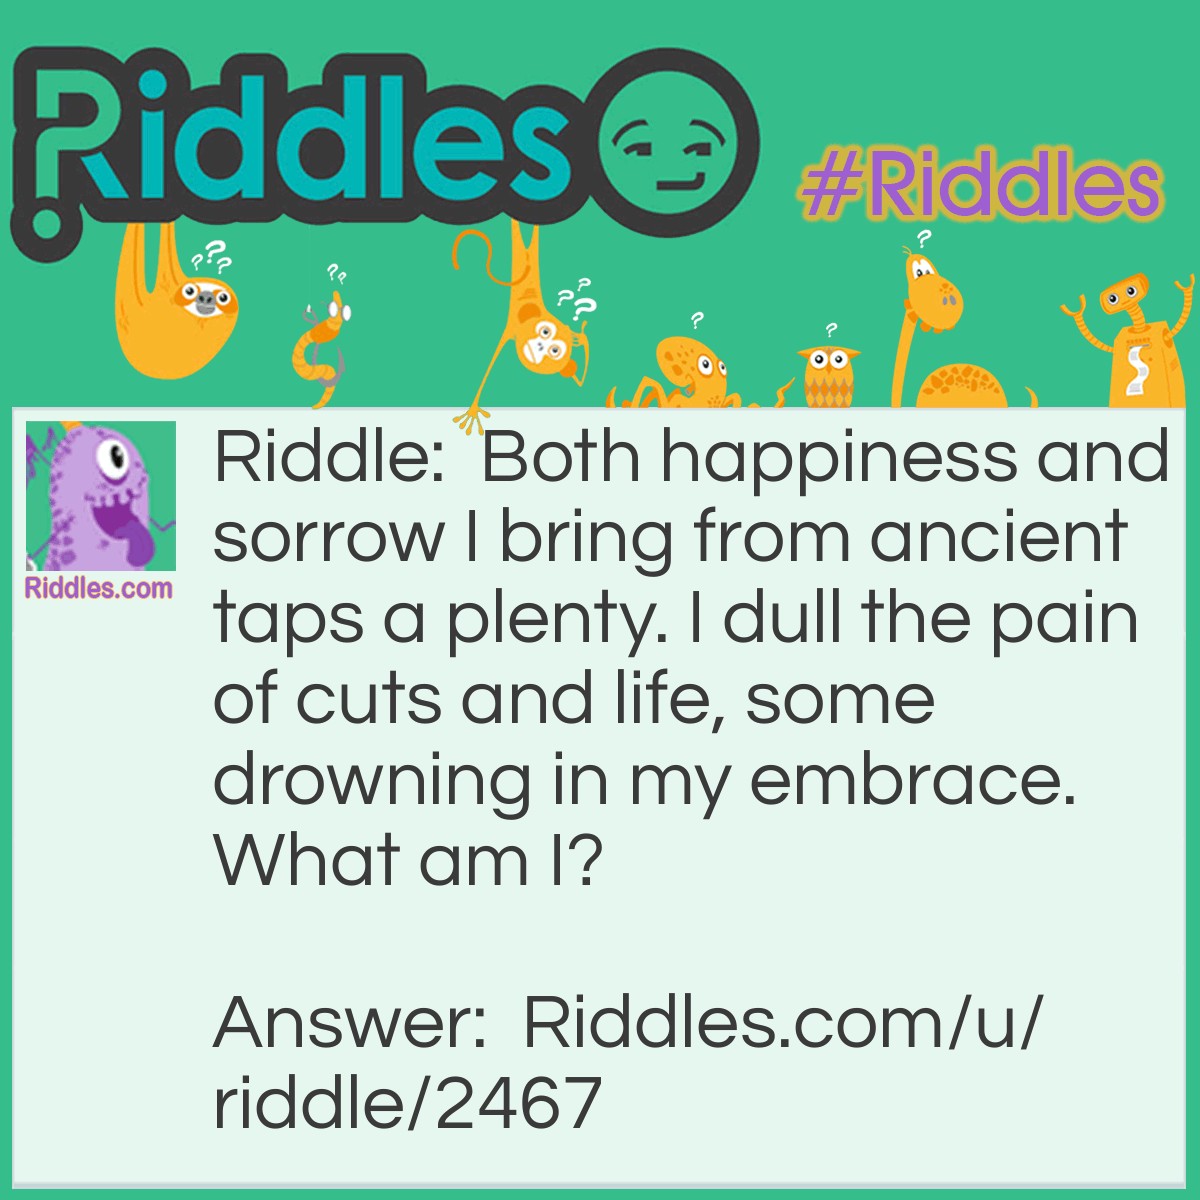 Riddle: Both happiness and sorrow I bring from ancient taps a plenty. I dull the pain of cuts and life, some drowning in my embrace. What am I? Answer: Alcohol.